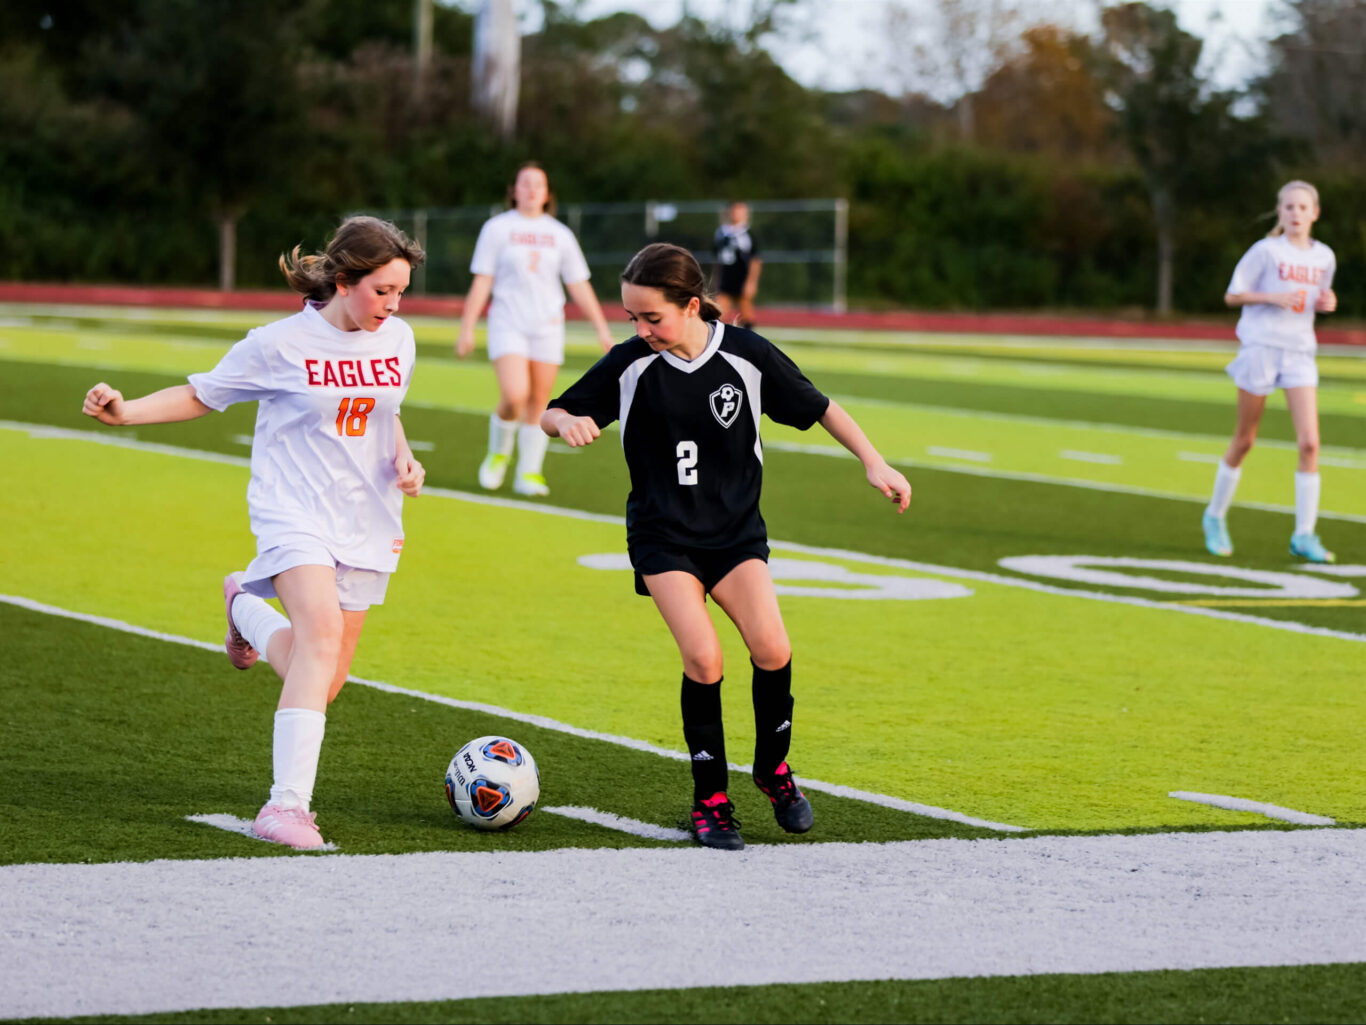 Two girls engaging in a game of soccer on a field.